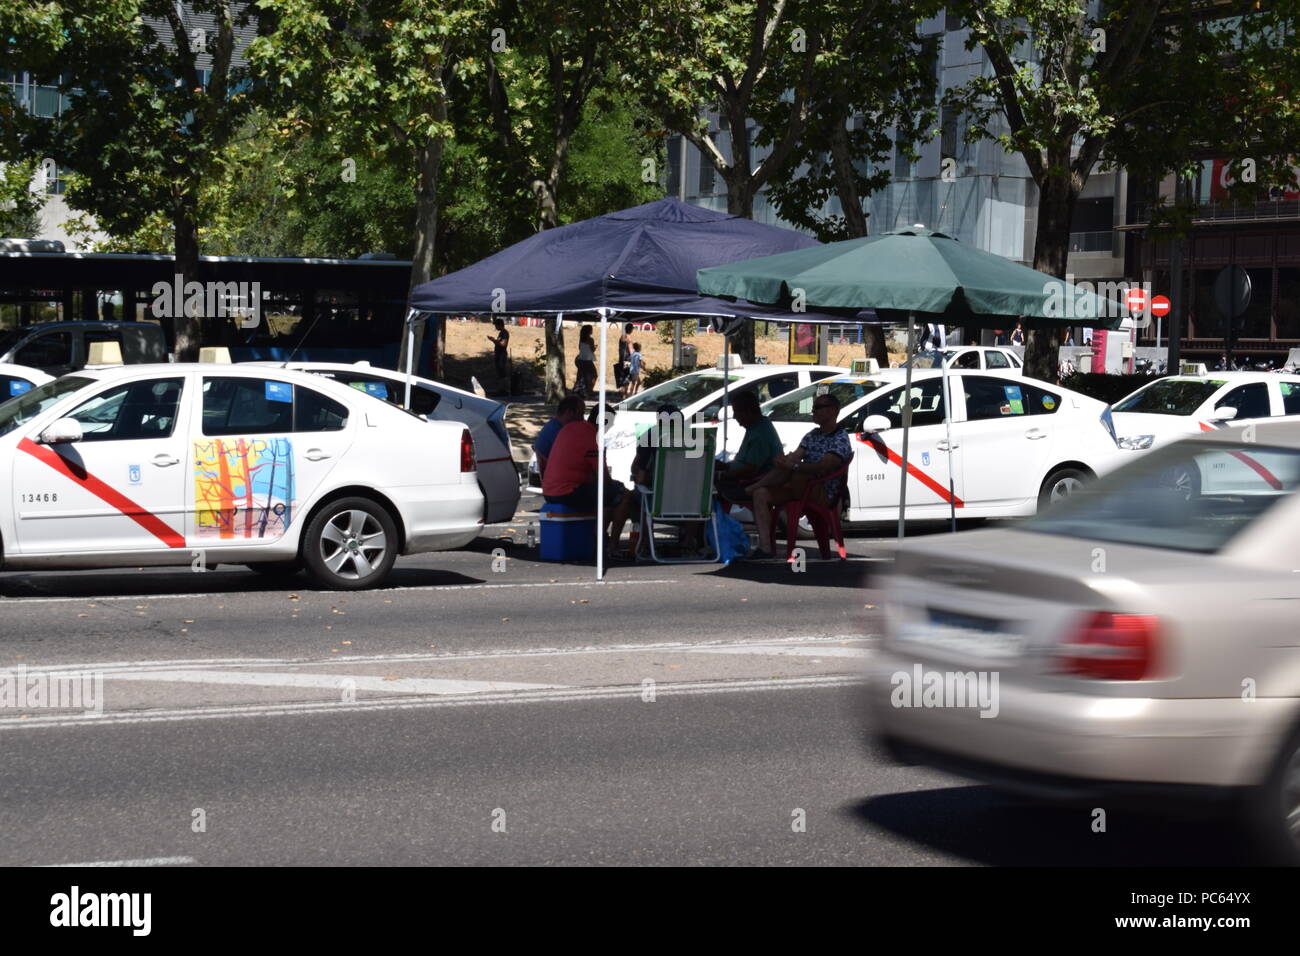 Madrid, Spain.  Taxis block an avenue amid a strike by cabbies in Madrid on July 31, 2018.    Taxi drivers across Spain kept striking against ride-hailing competitors such as Uber and Cabify, which they say unfairly threaten their livelihoods after government negotiations ended without a deal. The strike began in Barcelona last week and spread to Madrid at the weekend as drivers blocked main thoroughfares, demanding action from the government.  Sierra/797/Cordon Press Stock Photo